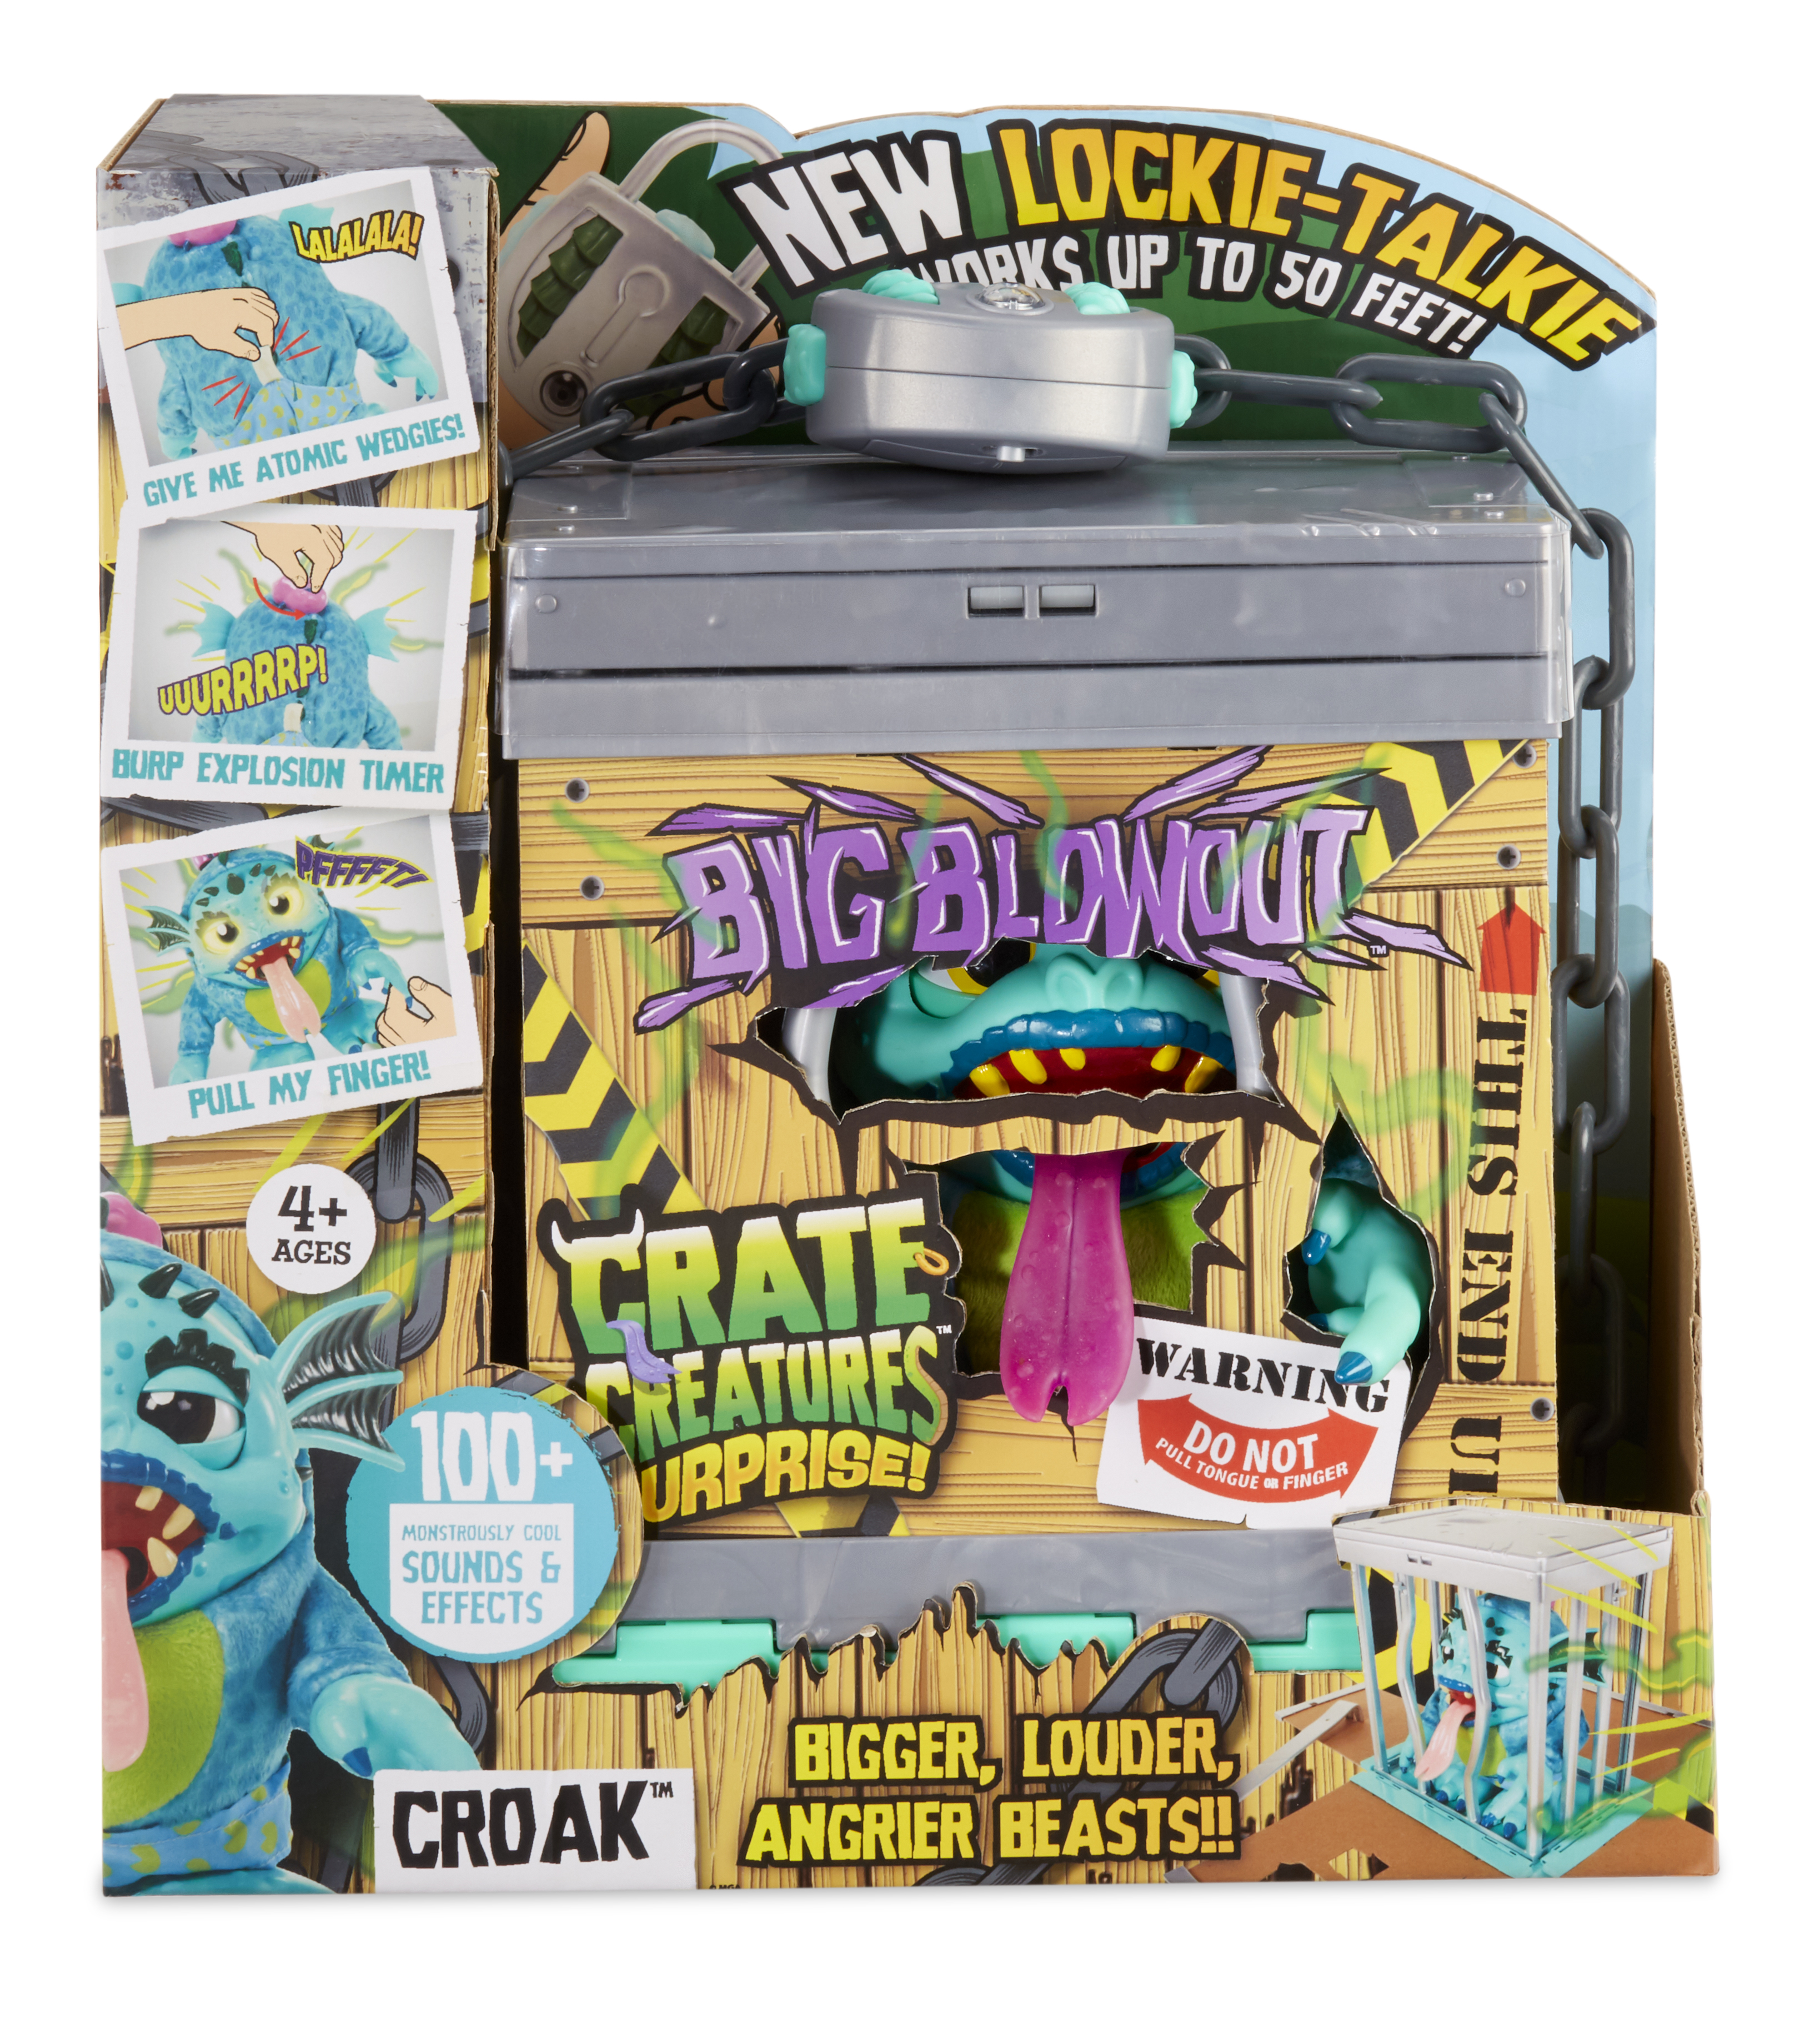 the study Dim Re-shoot crate creatures,Free Shipping,OFF65%,ID=41